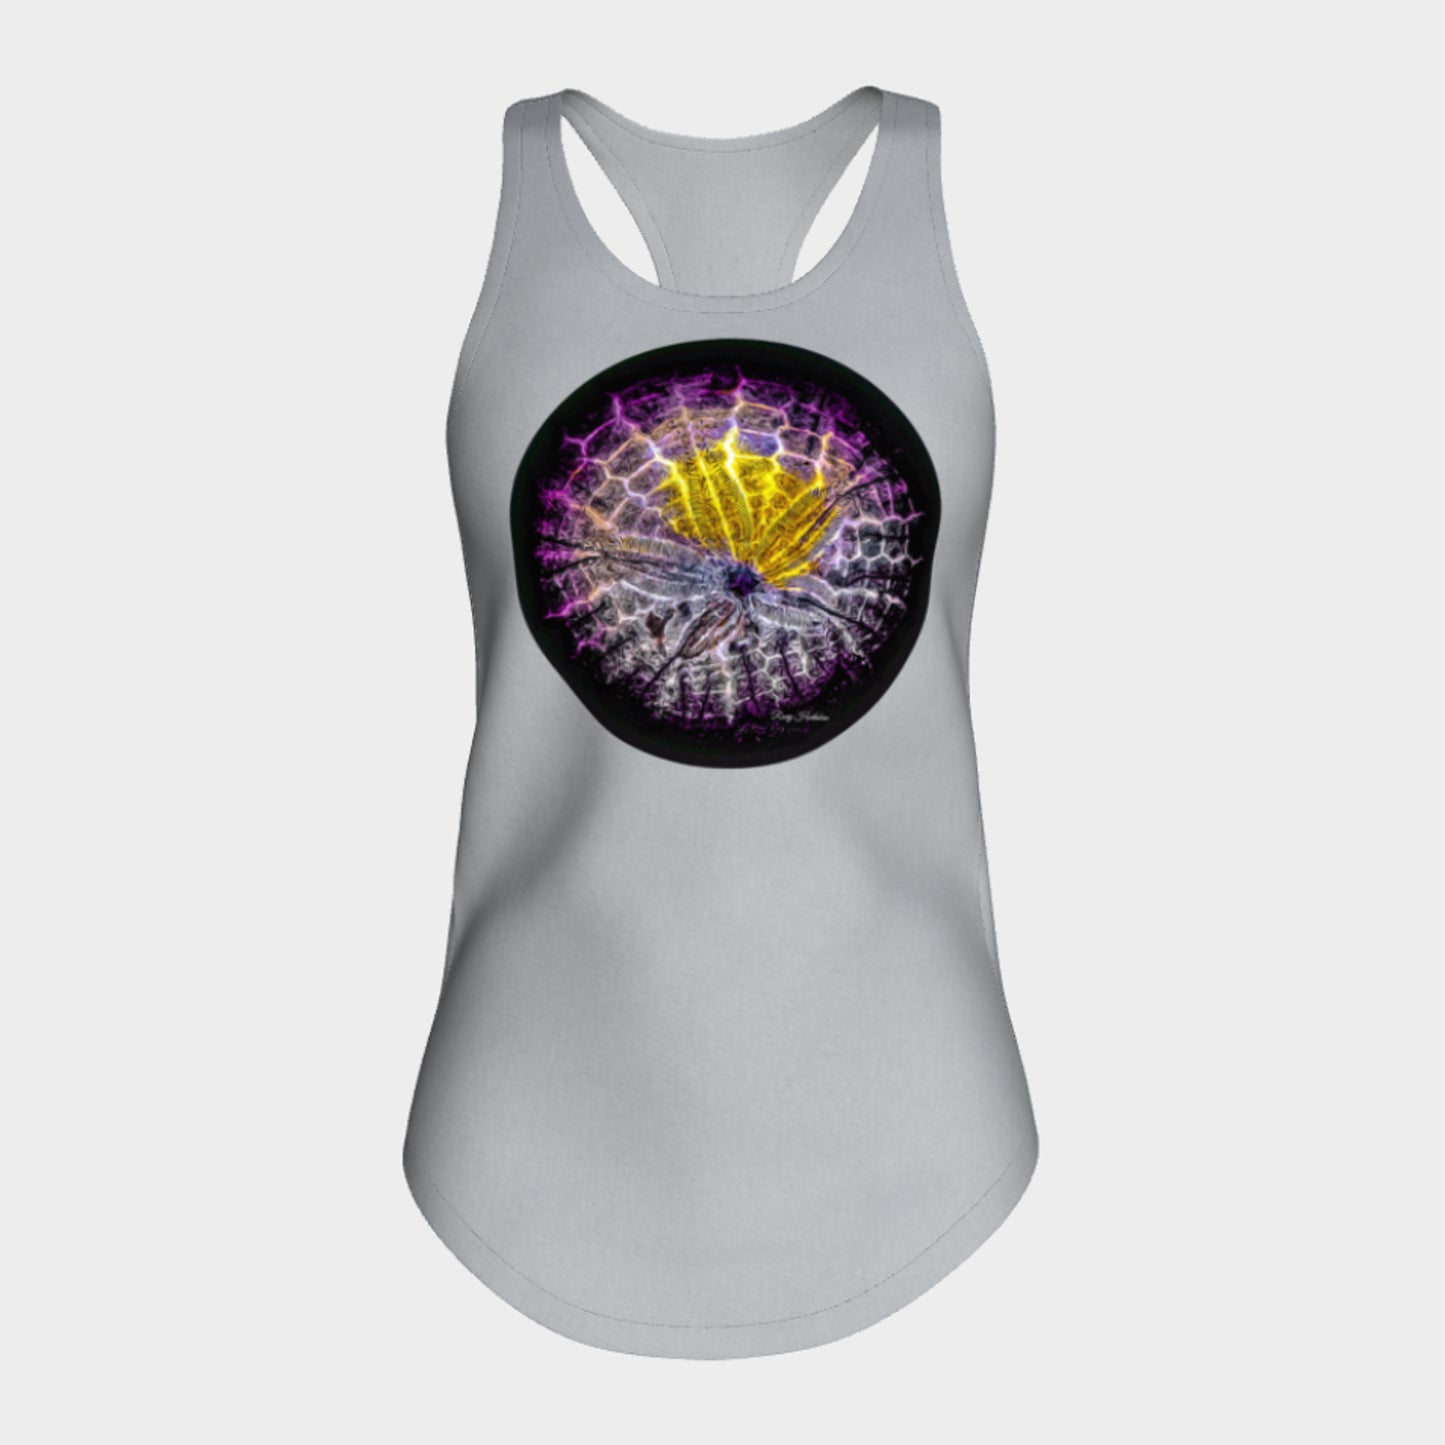 Spotlight Sand Dollar Racerback Tank Top  Excellent choice for the summer or for working out.   Made from 60% spun cotton and 40% poly for a mix of comfort and performance, you get it all (including my photography and digital art) with this custom printed racerback tank top.   Van Isle Goddess Next Level racerback tank top will quickly become you go-to tank top because of the super comfy fit!